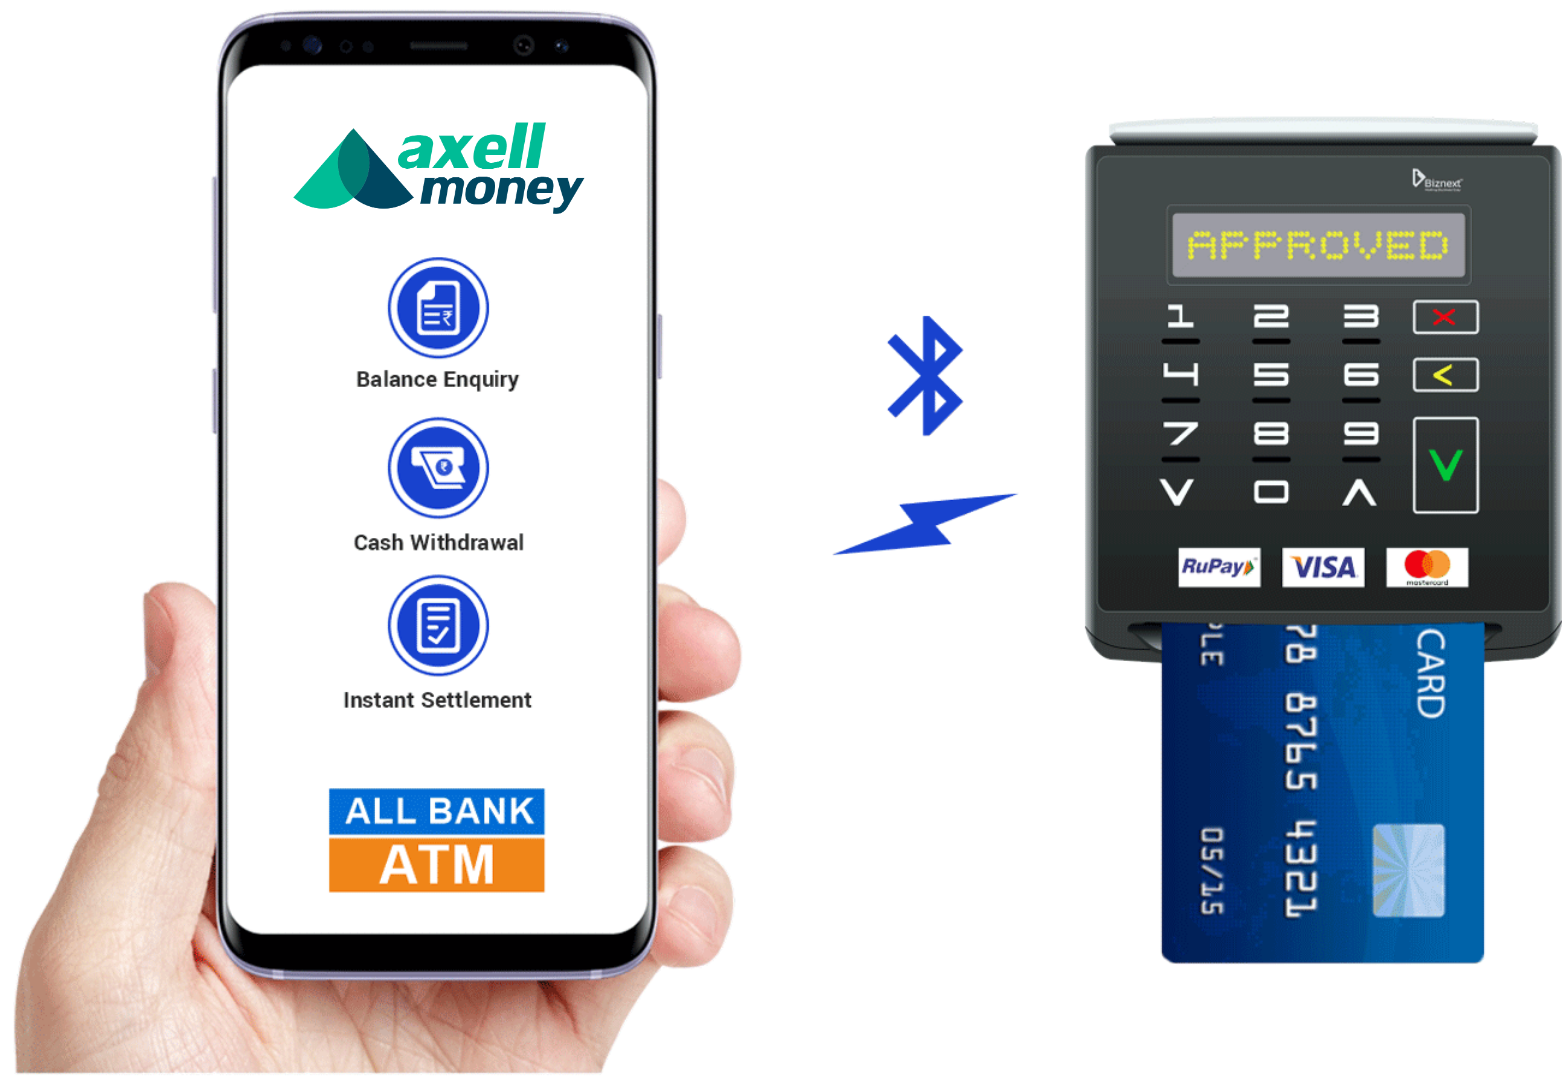 What is Micro ATM - Axell Money